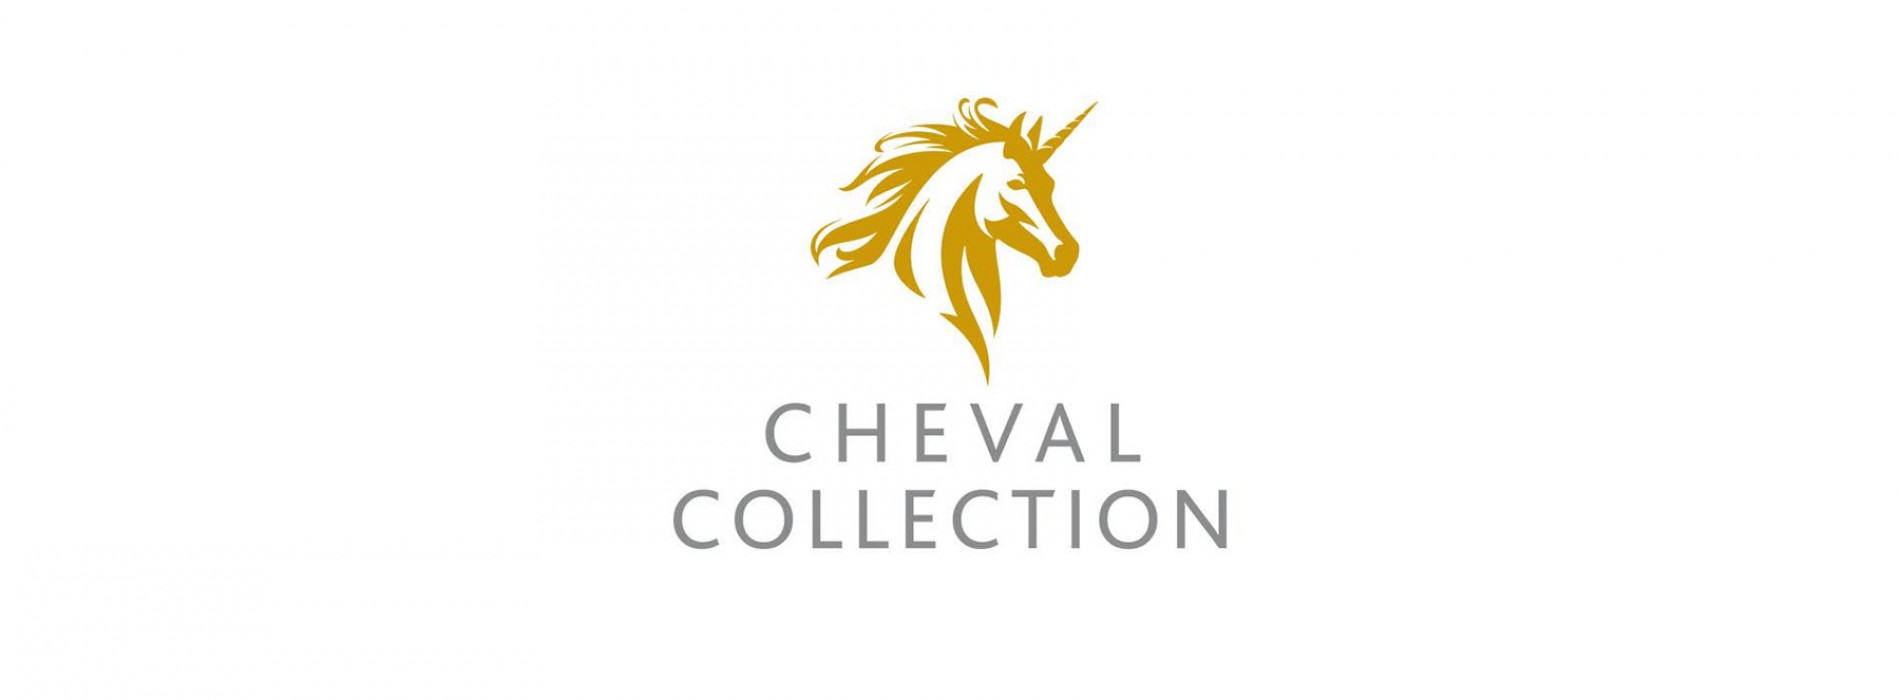 Cheval Collection Joins Global Hotel Alliance With Luxury Serviced Apartments Across Edinburgh, London and Dubai